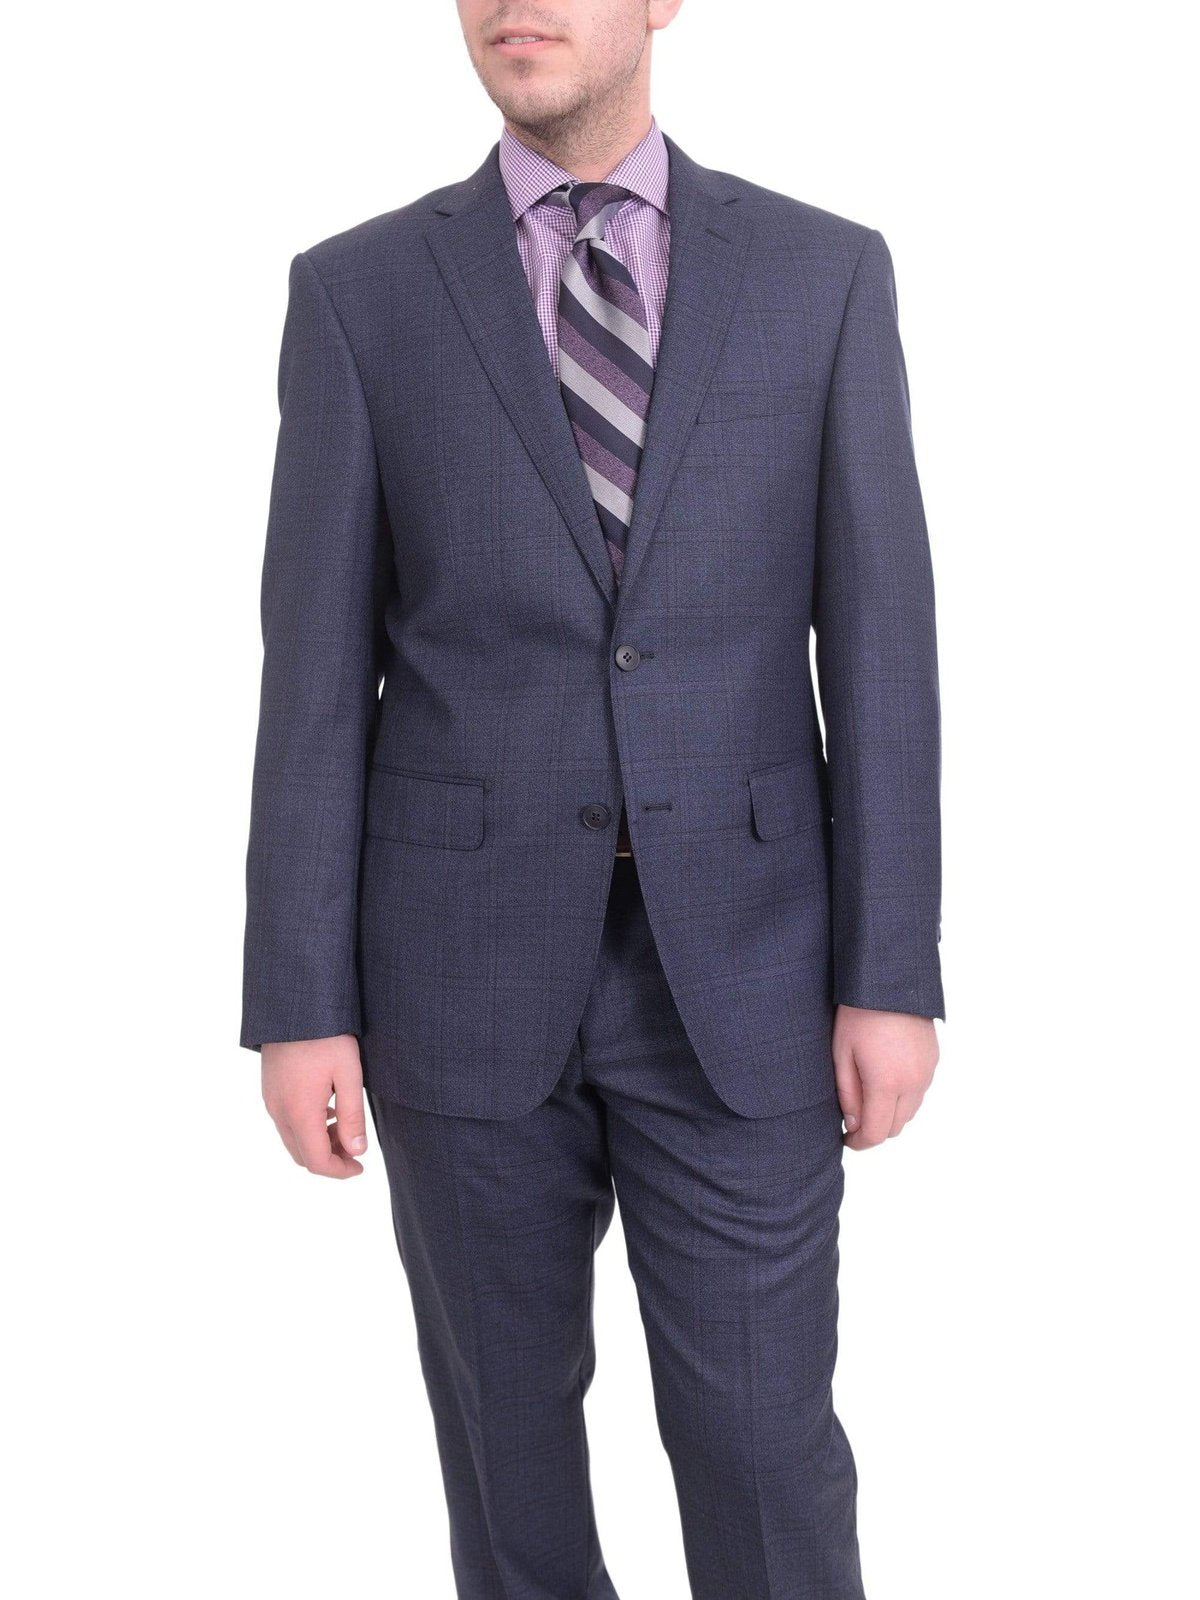 London Fog TWO PIECE SUITS 38S Mens Slim Fit Blue With Purple Windowpane Two Button Wool Suit